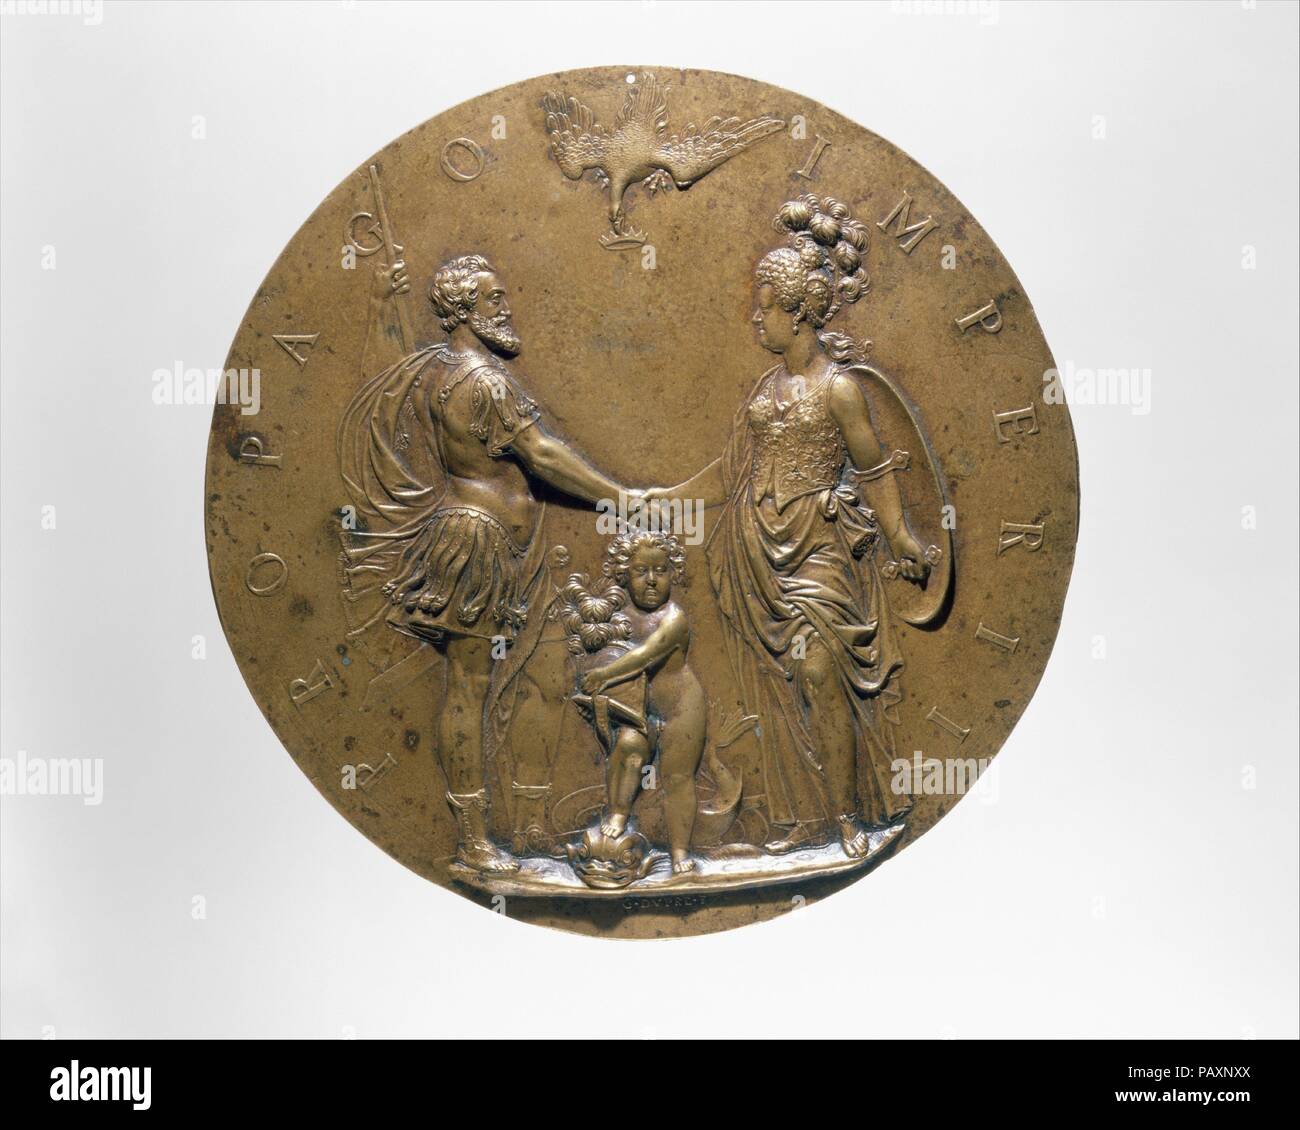 Henri IV, Marie de Médicis and the Dauphin. Artist: Guillaume Dupré (French, 1579-1640). Culture: French, Paris. Dimensions: Diameter: 7 1/2 in. (19.1 cm). Date: 1605.  The composition represents a rethinking and clarification of a smaller medal that Dupré produced in 1603 to celebrate Henri IV's heir. The dauphin, the future Louis XIII, stands between his parents, who are garbed as Mars and Minerva. With one foot planted on the head of a dolphin, his usual attribute, the dauphin bears his father's helmet. Henri IV was already greatly taken with the earlier medal and issued letters patent auth Stock Photo